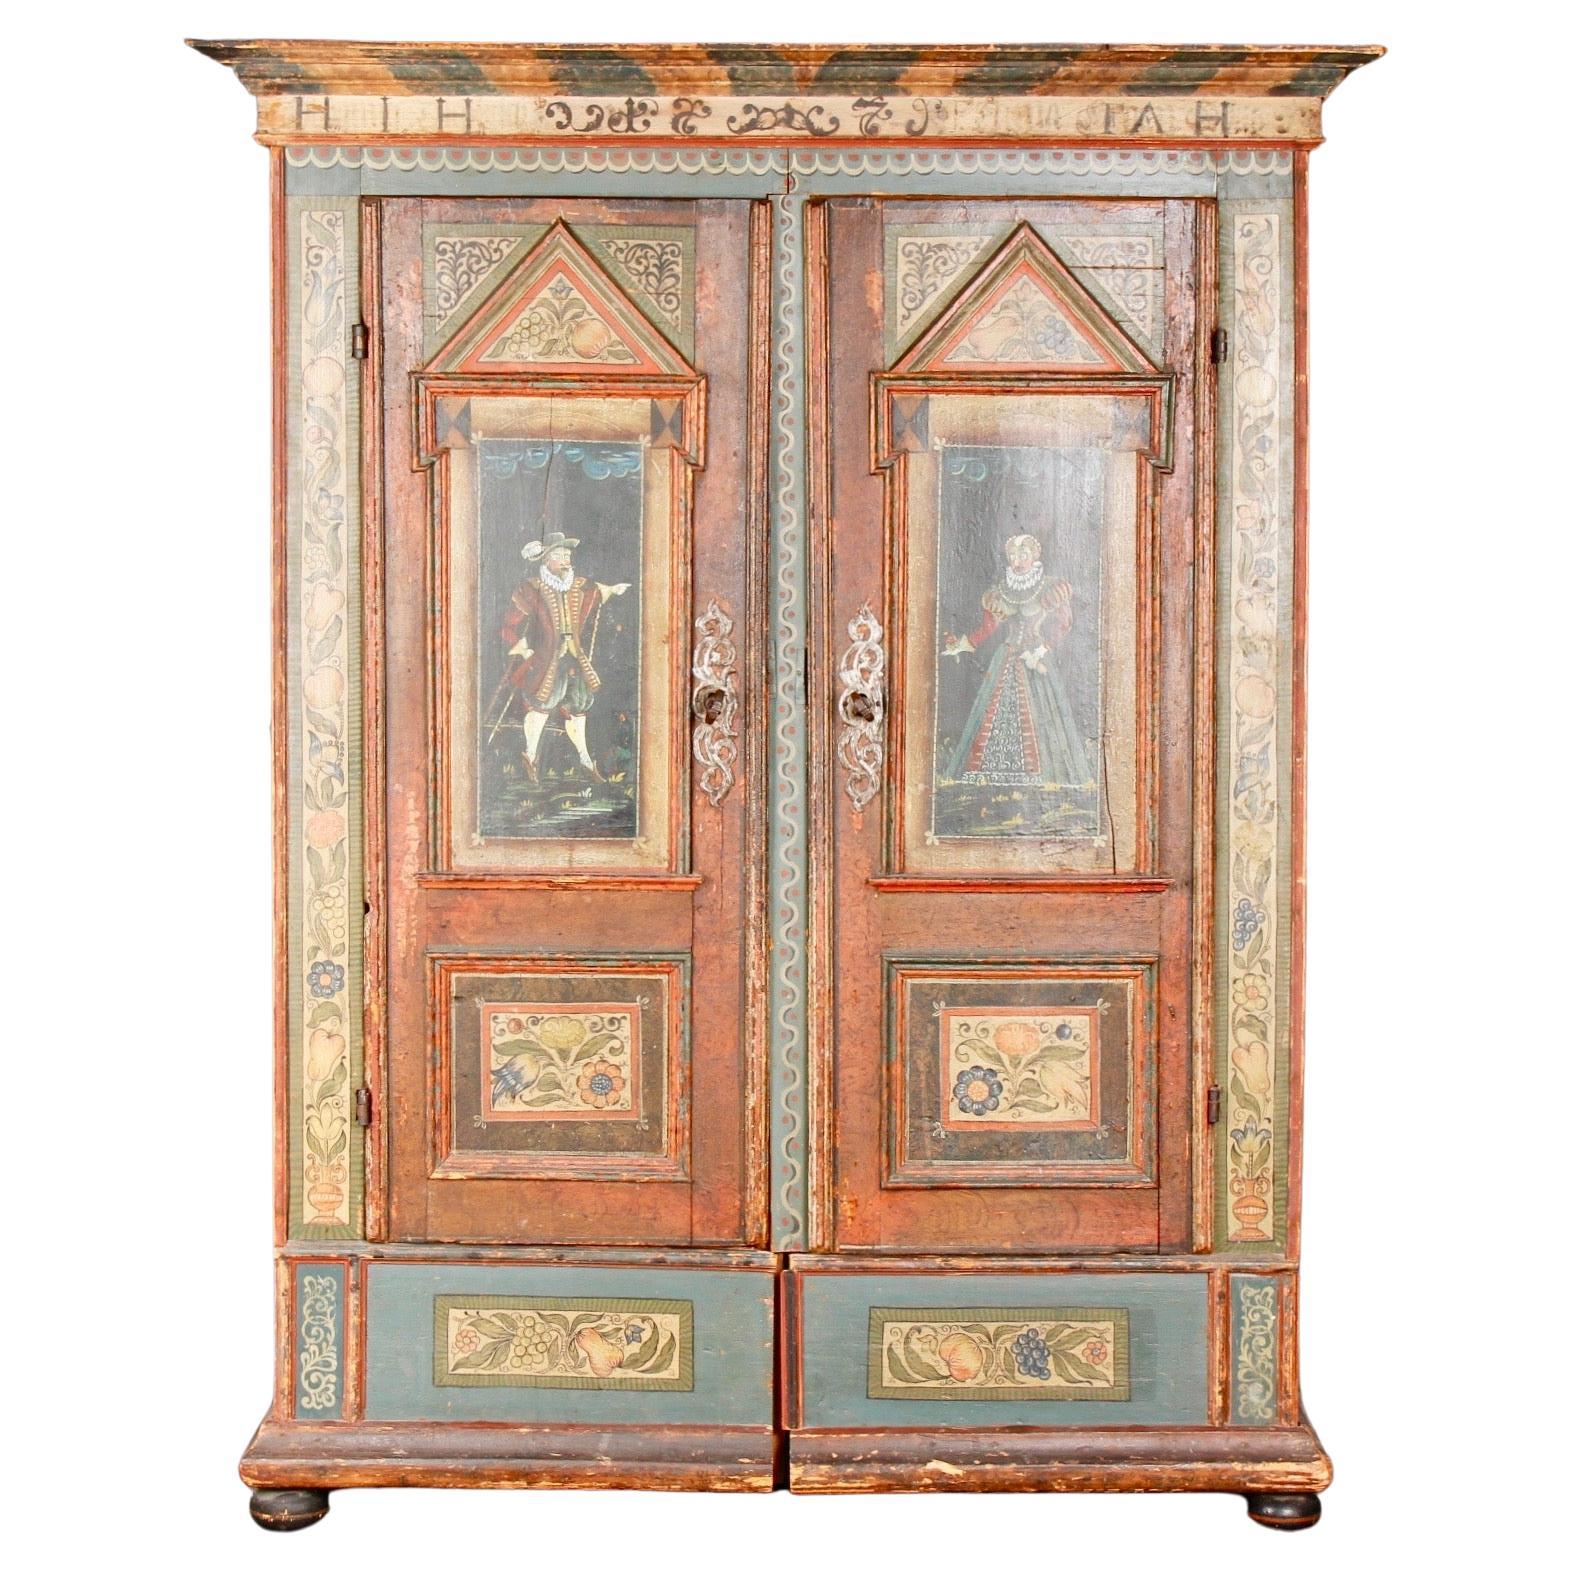 Swiss alp painted  marriage cupboard dated 1779